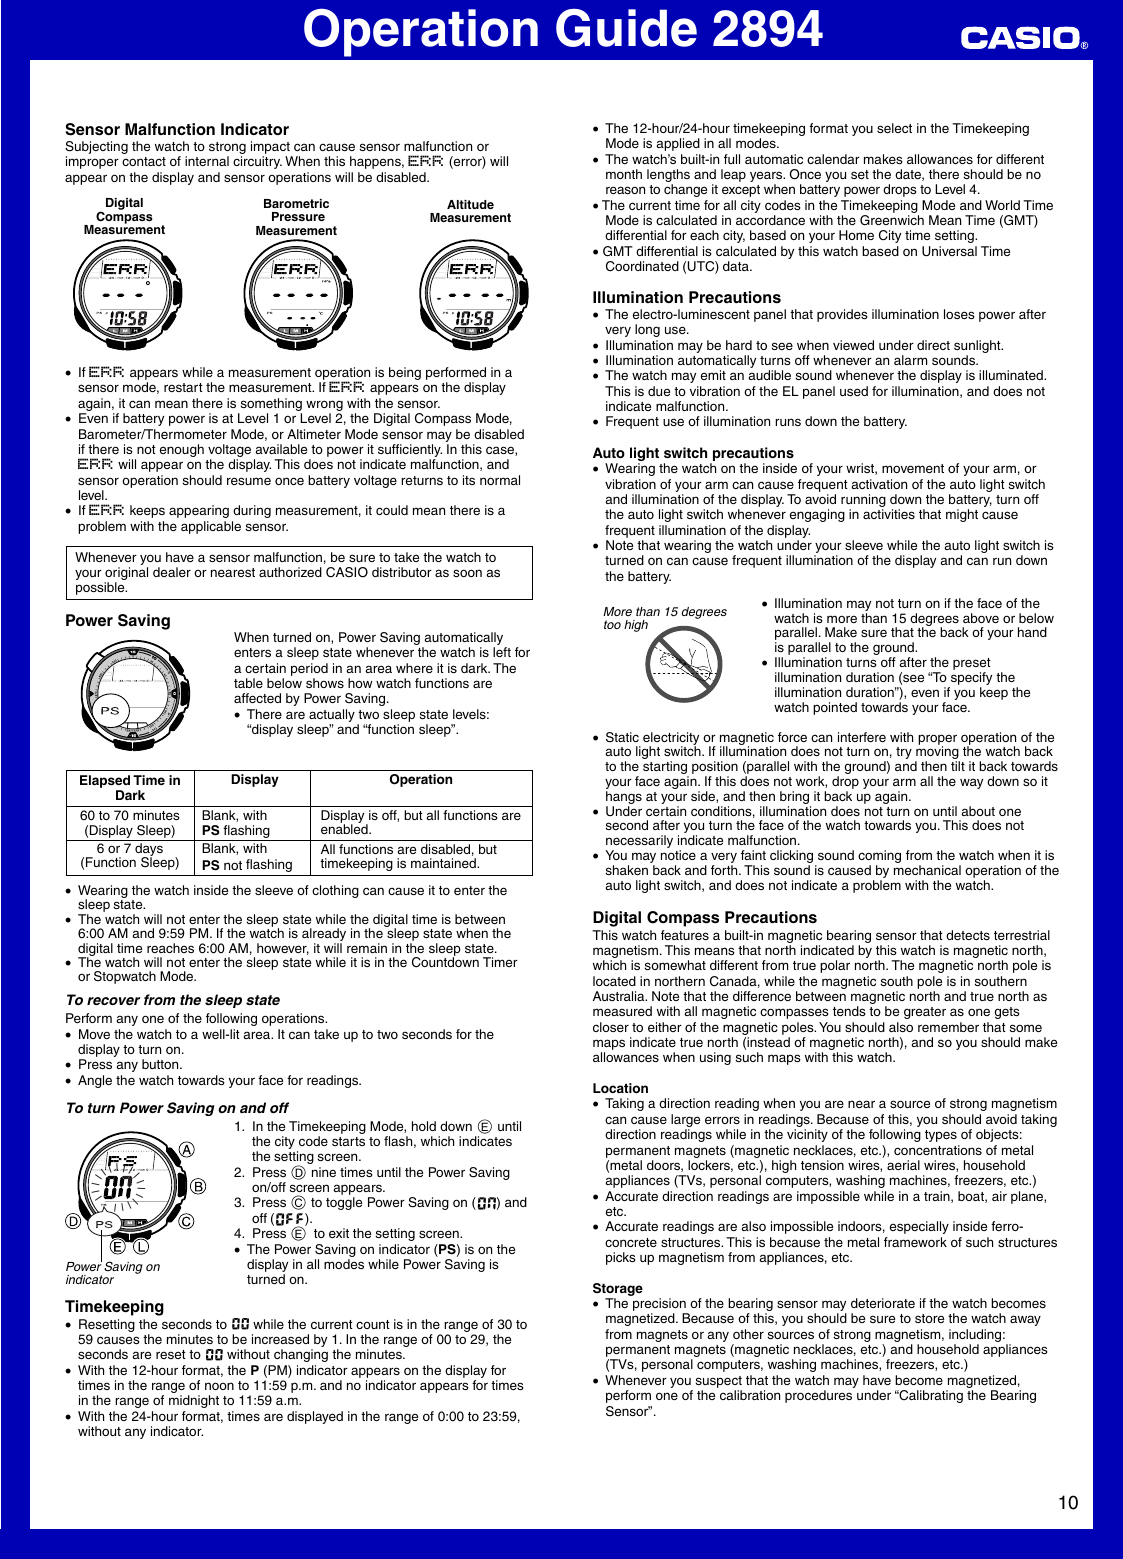 Page 10 of 12 - Casio Casio-Pathfinder-Pag80-Operation-Manual- QW-2894  Casio-pathfinder-pag80-operation-manual